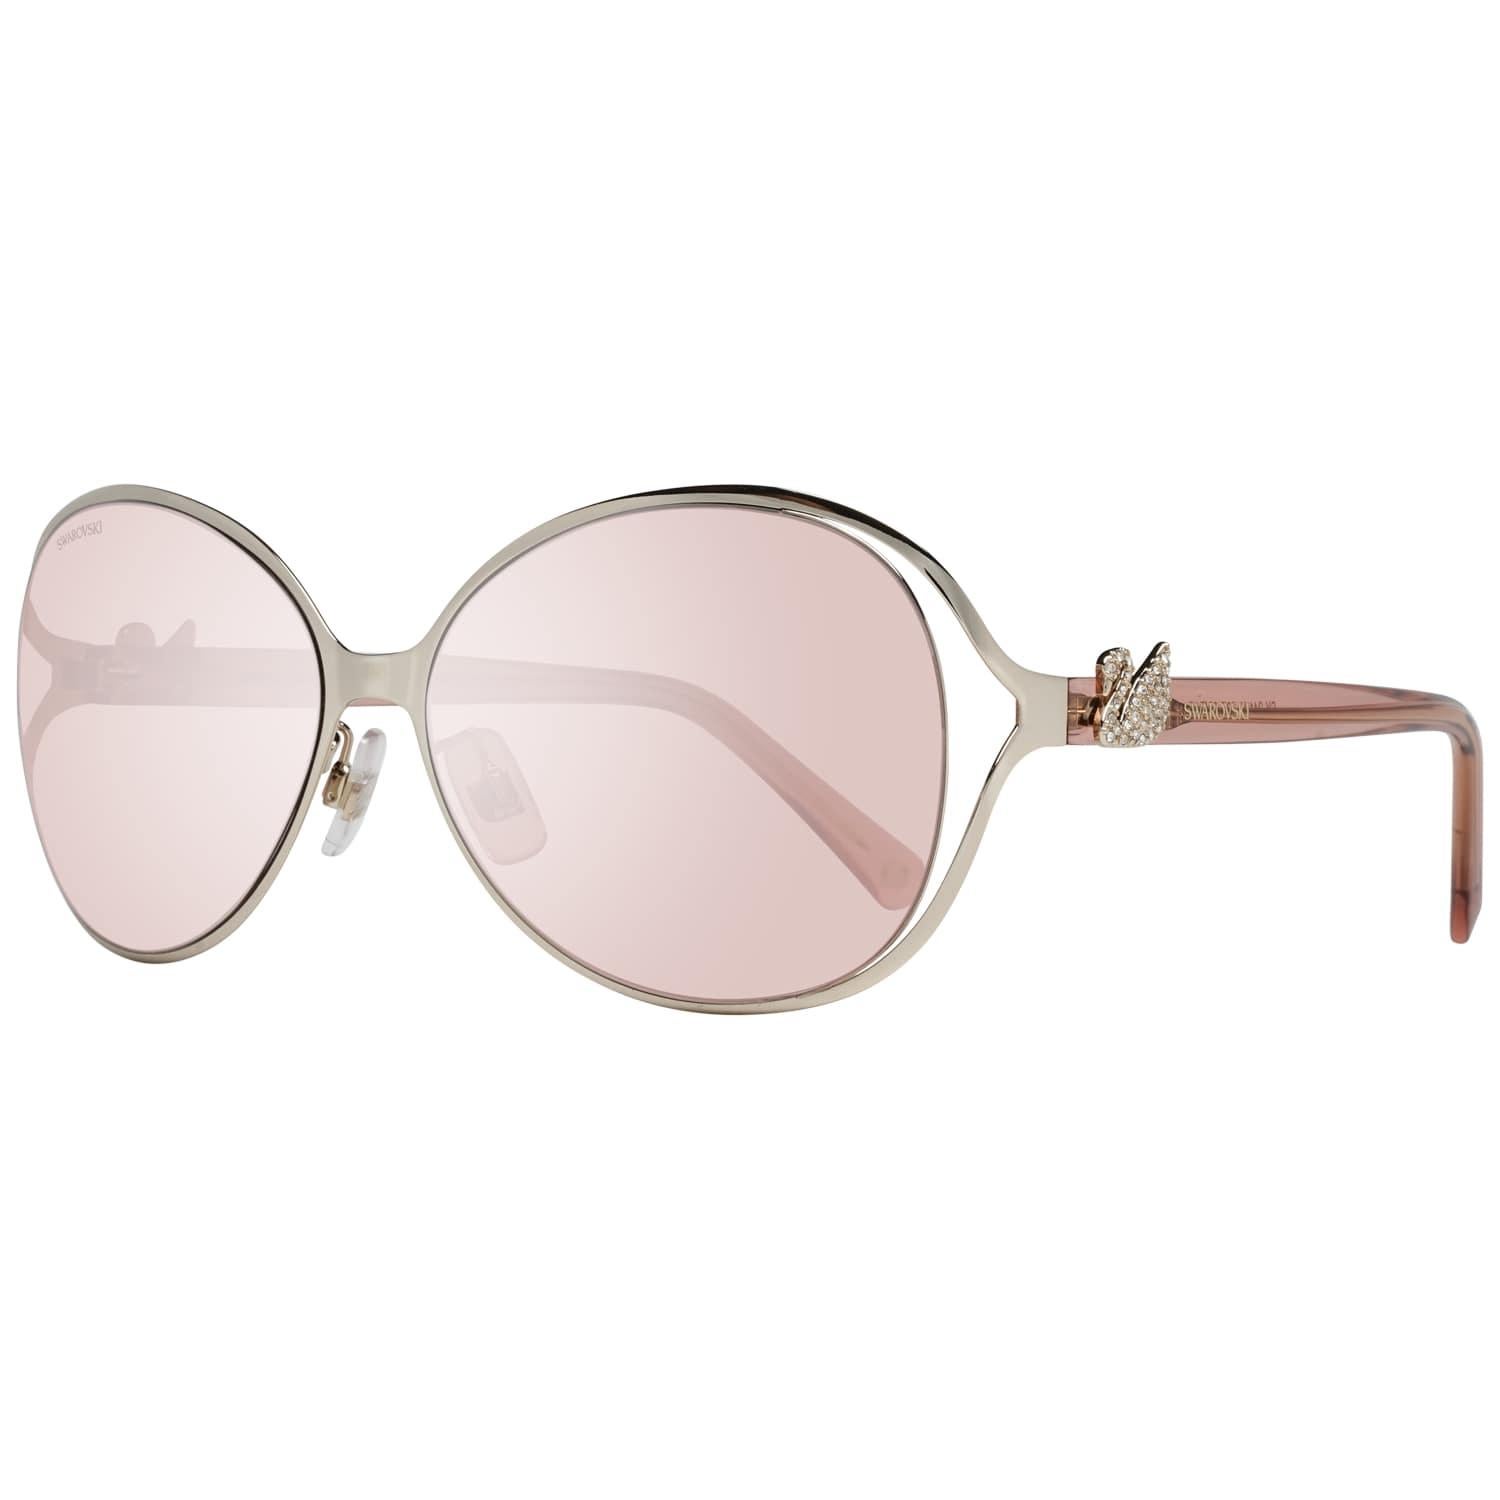 DetailsMATERIAL: MetalCOLOR: GoldMODEL: SK0241-K 6032ZGENDER: WomenCOUNTRY OF MANUFACTURE: ChinaTYPE: SunglassesORIGINAL CASE?: YesSTYLE: OvalOCCASION: CasualFEATURES: LightweightLENS COLOR: PinkLENS TECHNOLOGY: MirroredYEAR MANUFACTURED: